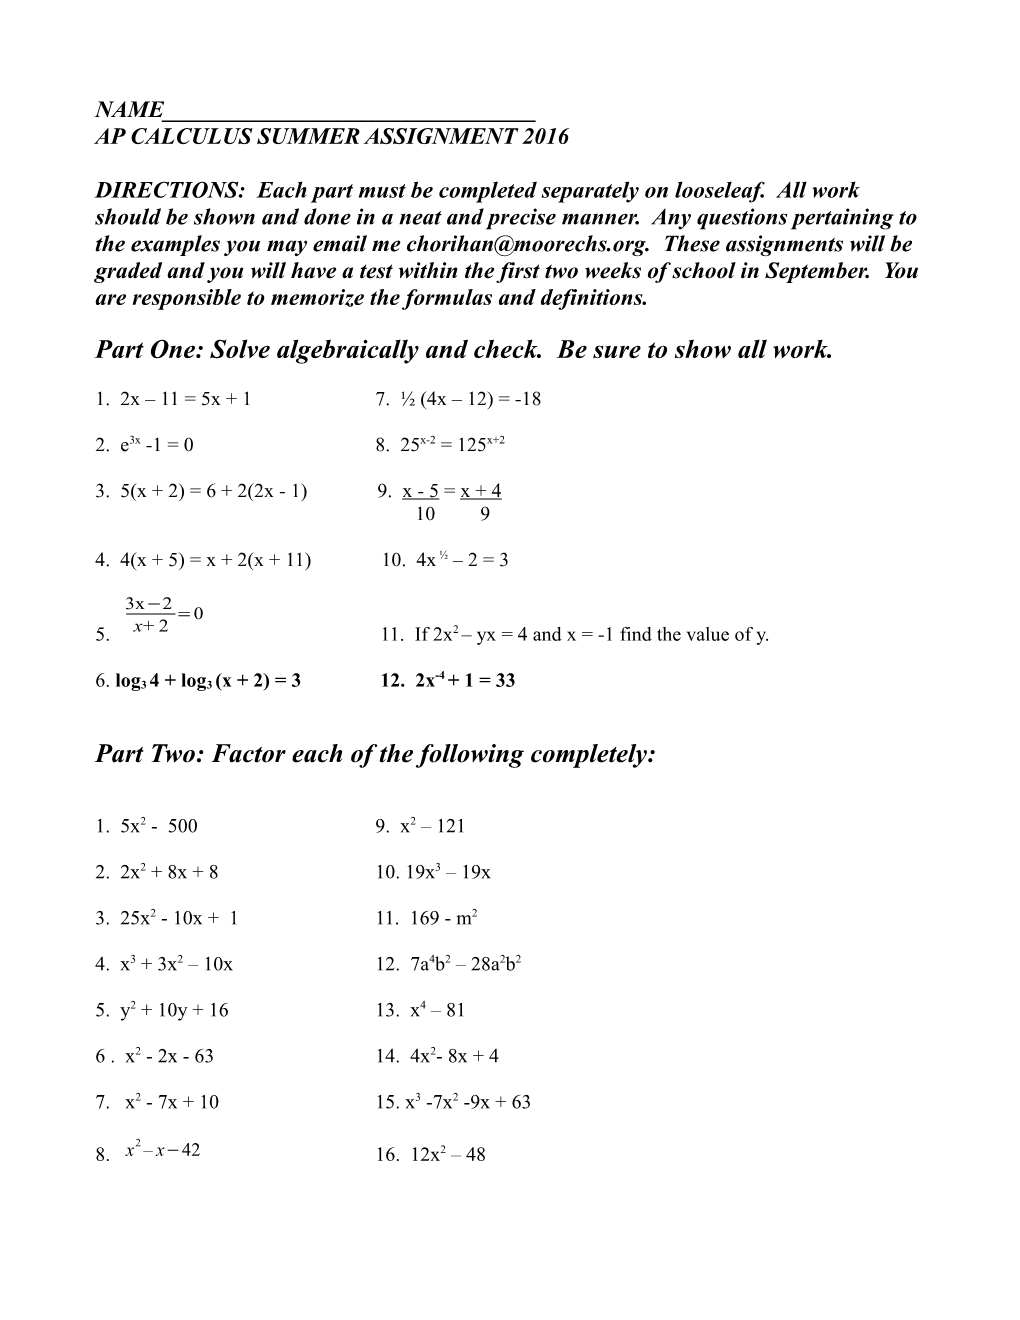 Part One: Solve Algebraically and Check. Be Sure to Show All Work